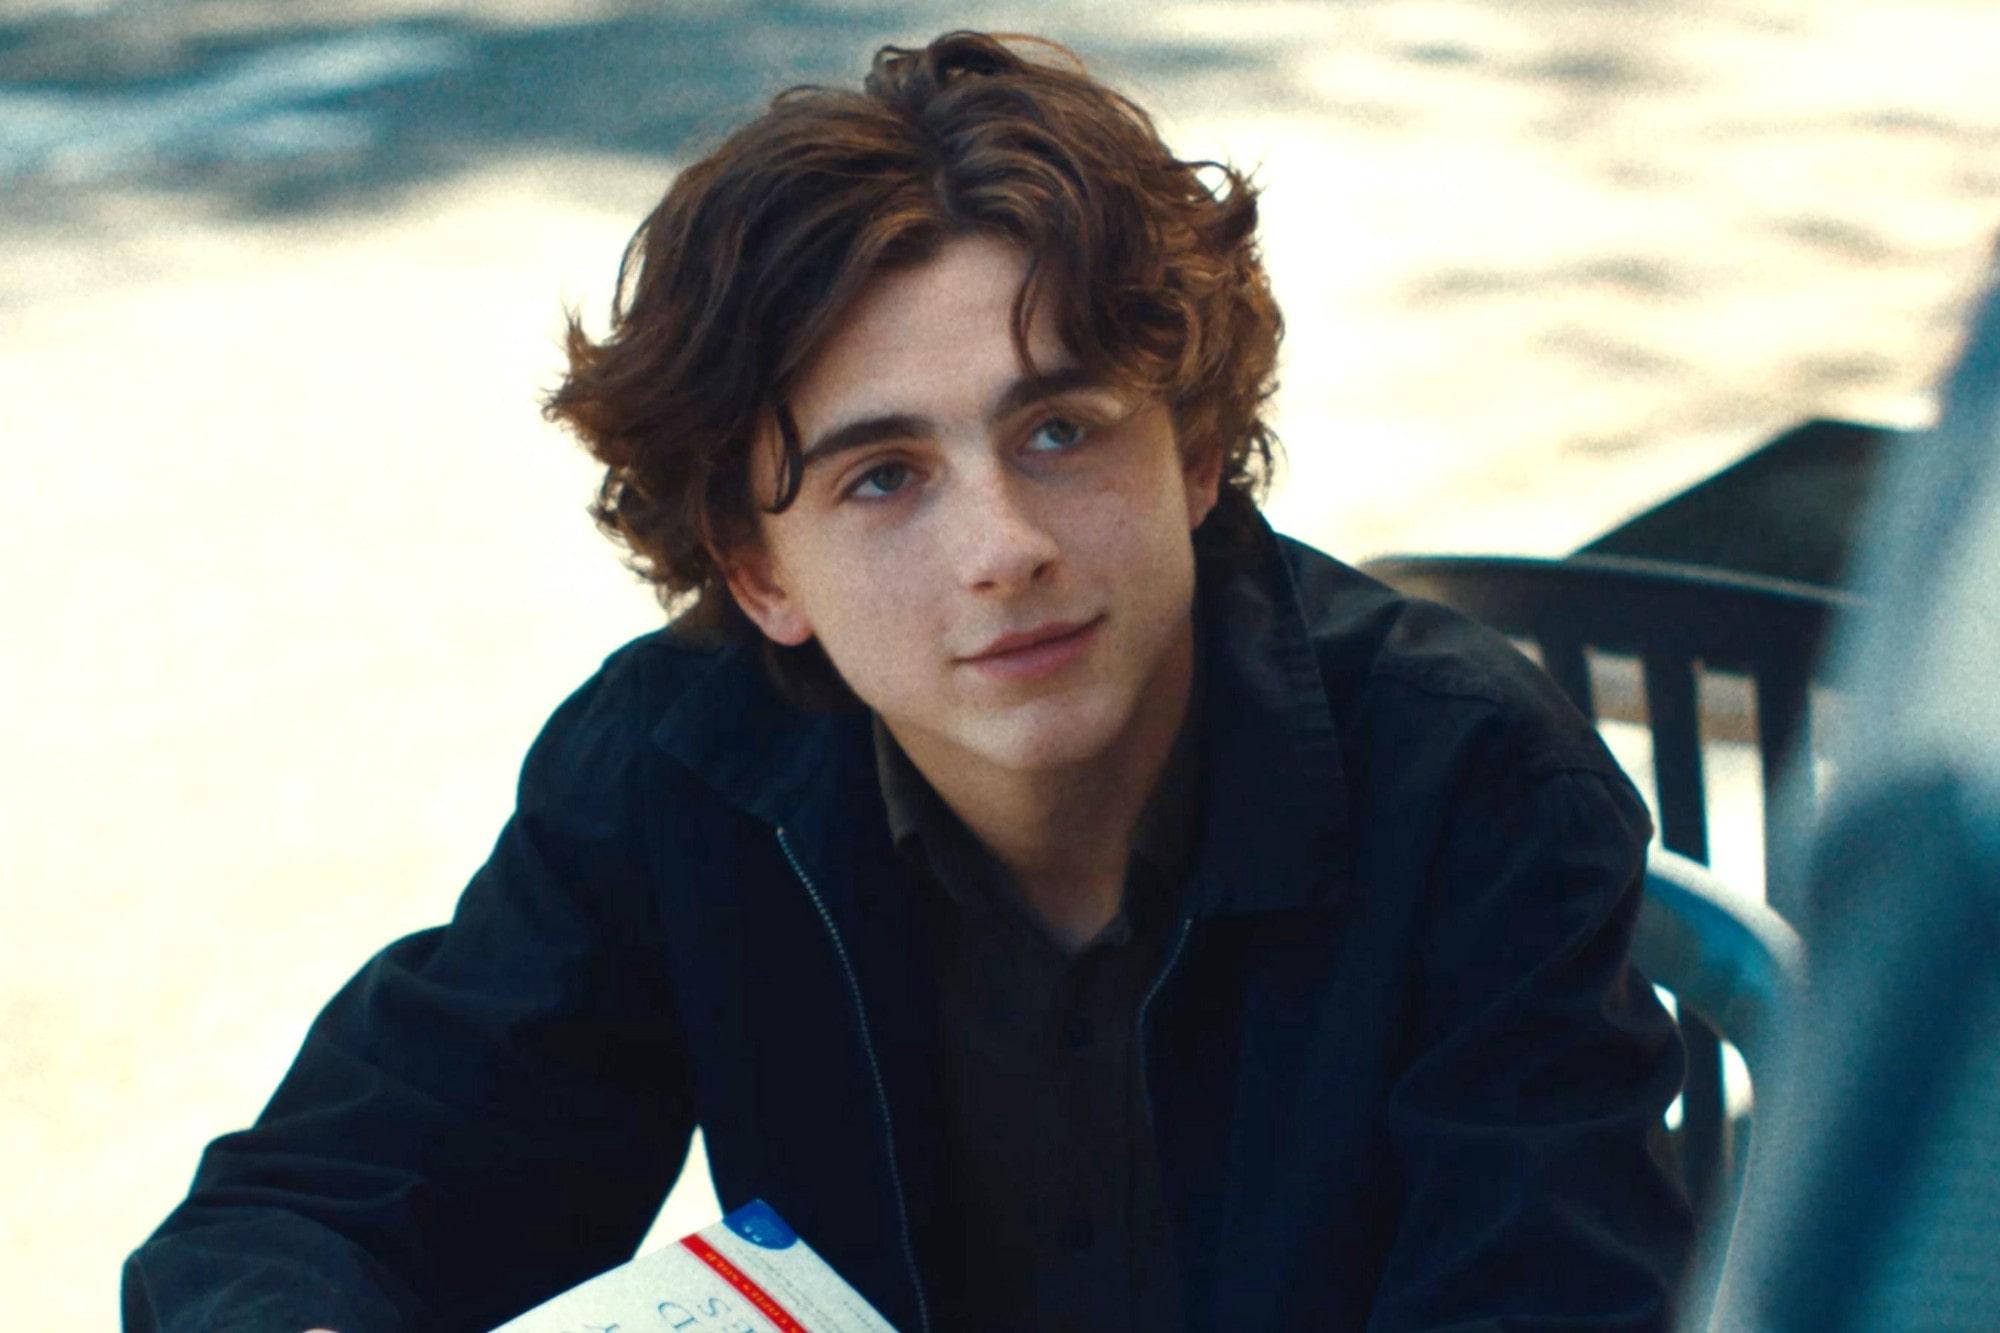 Timothee Chalamet as the young king in 'The King' - Timothee Chalamet